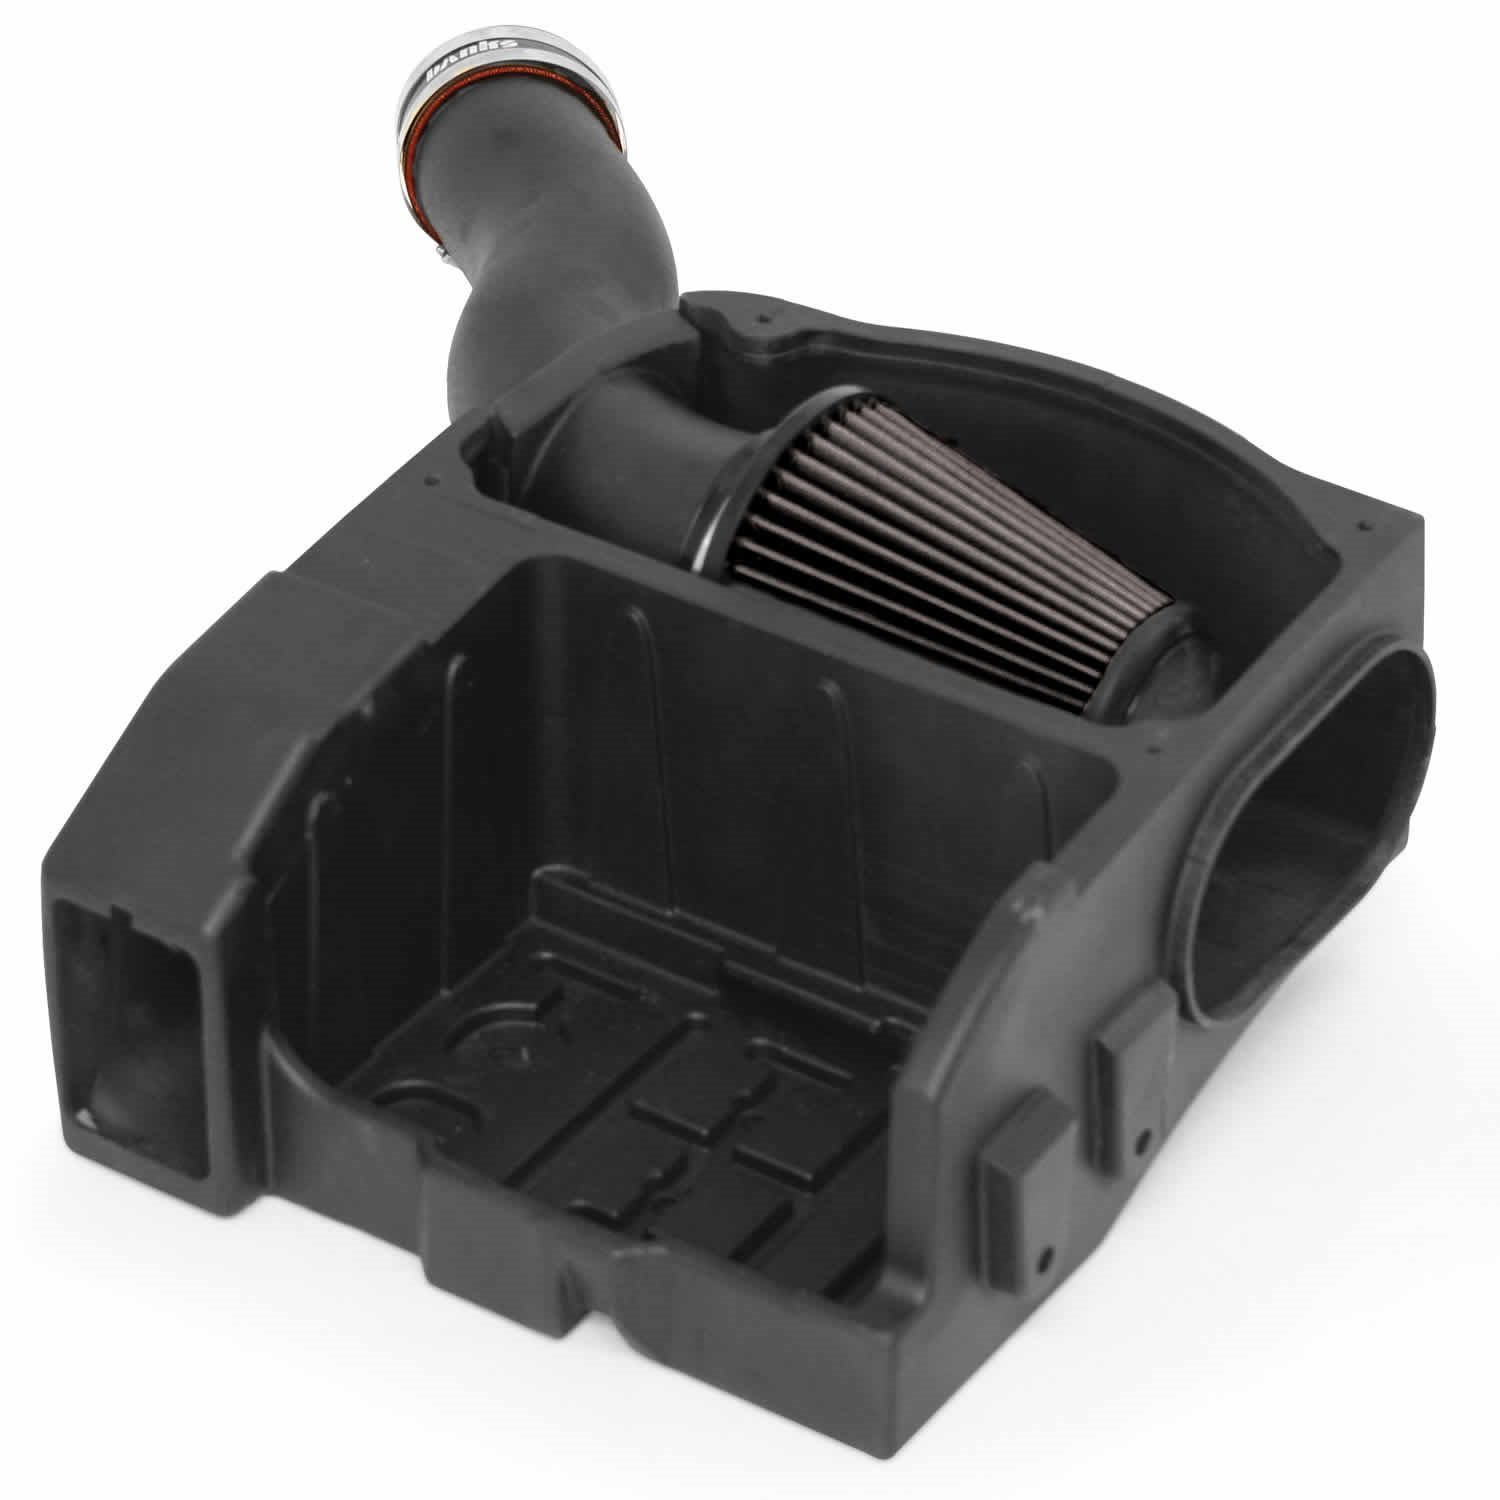 Ram-Air Intake System for 1999-2003 Ford 7.3L